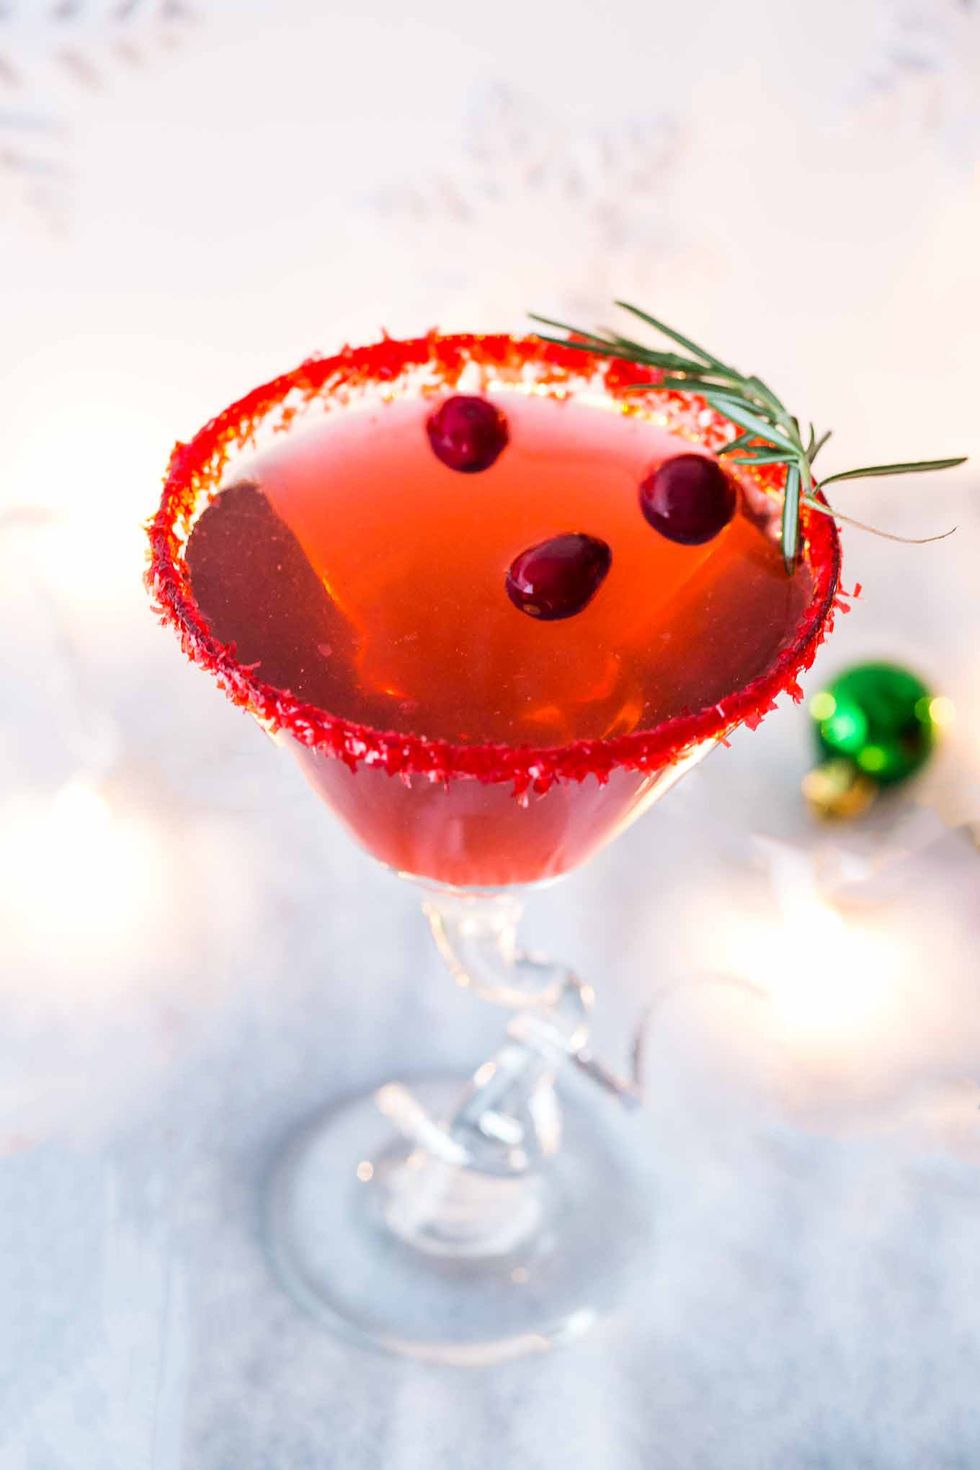 https://hips.hearstapps.com/hmg-prod/images/smirnoff-holiday-cosmo-6-1544813782.jpg?crop=1xw:1xh;center,top&resize=980:*